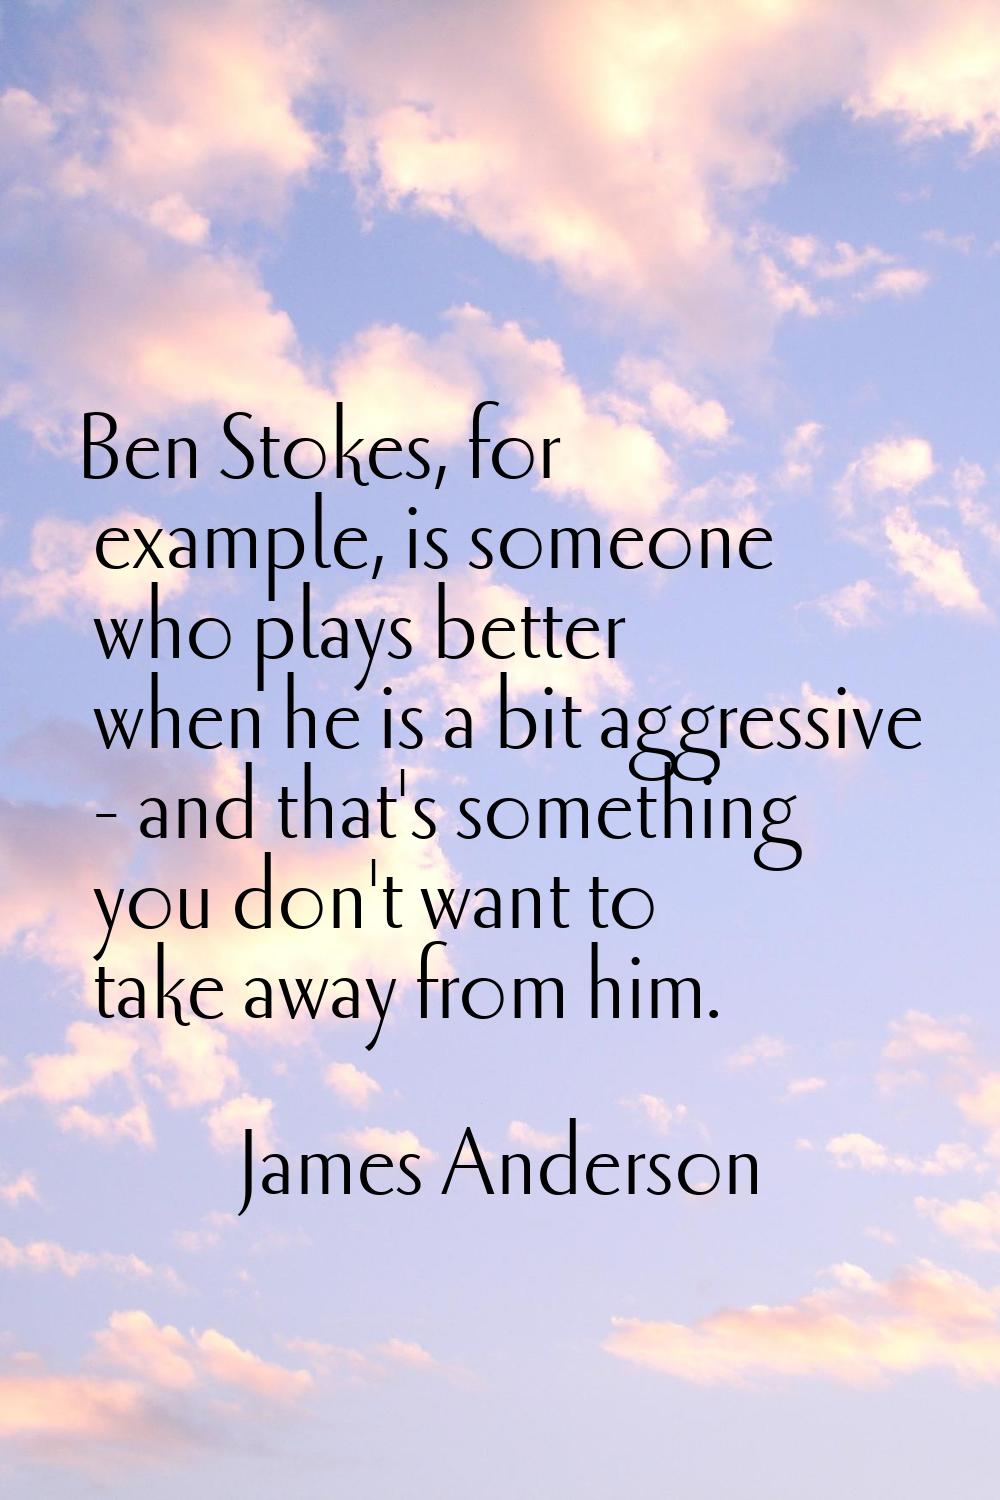 Ben Stokes, for example, is someone who plays better when he is a bit aggressive - and that's somet